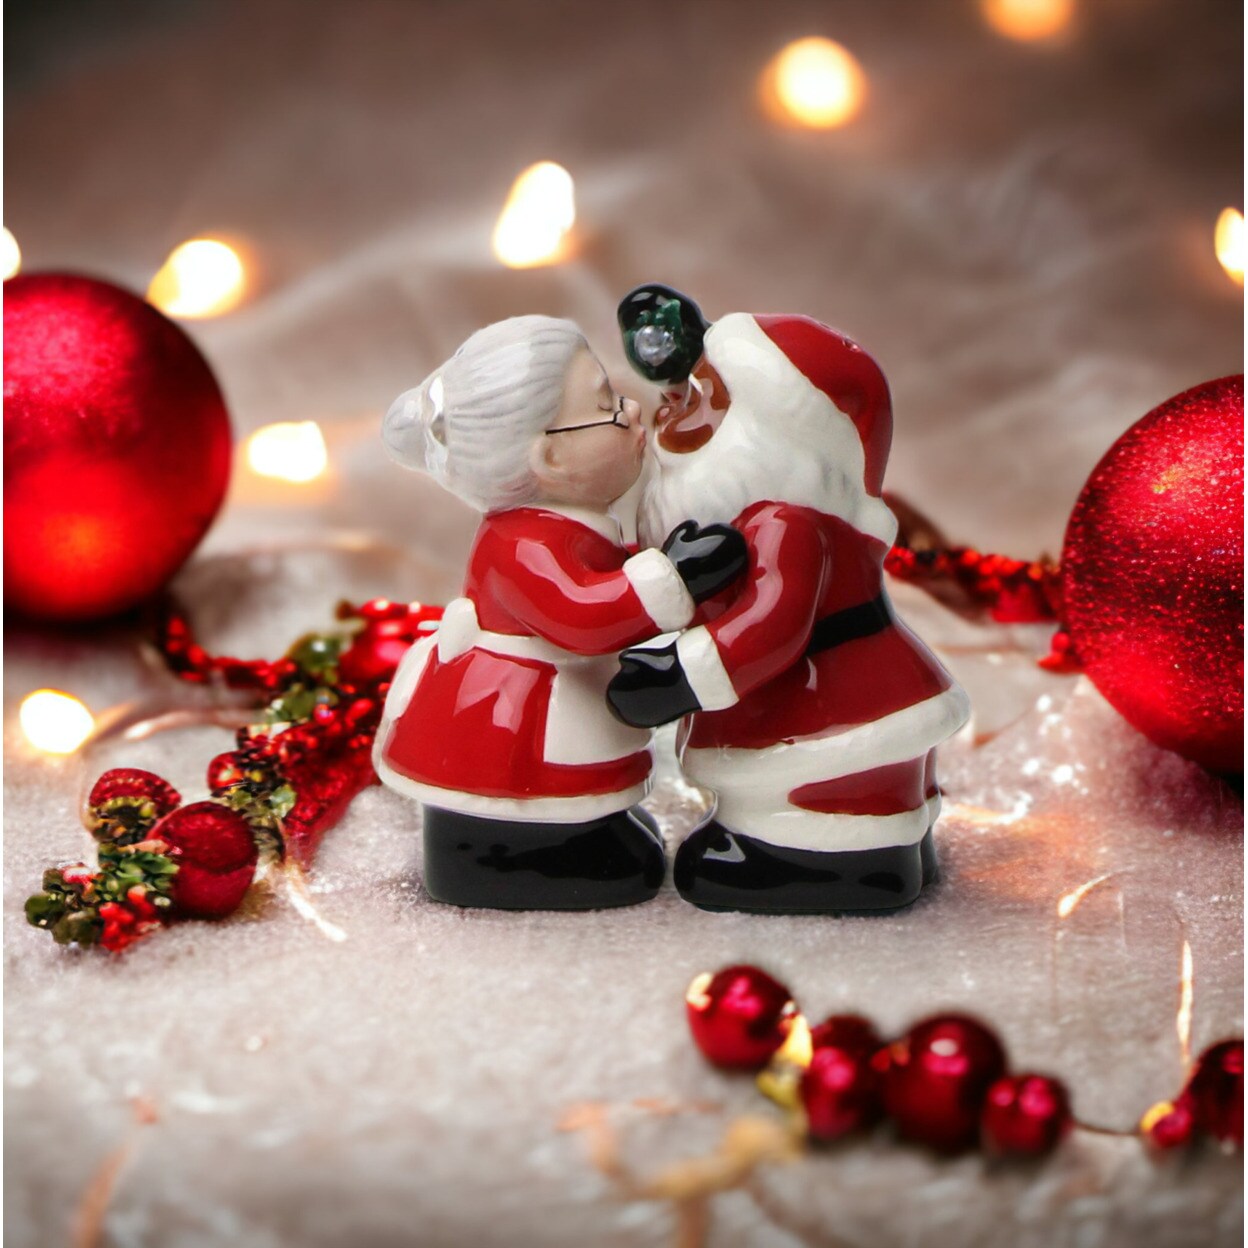 kevinsgiftshoppe Ceramic  Interracial Santa and Mrs. Claus Salt and Pepper Shakers Home Decor   Kitchen Decor kit